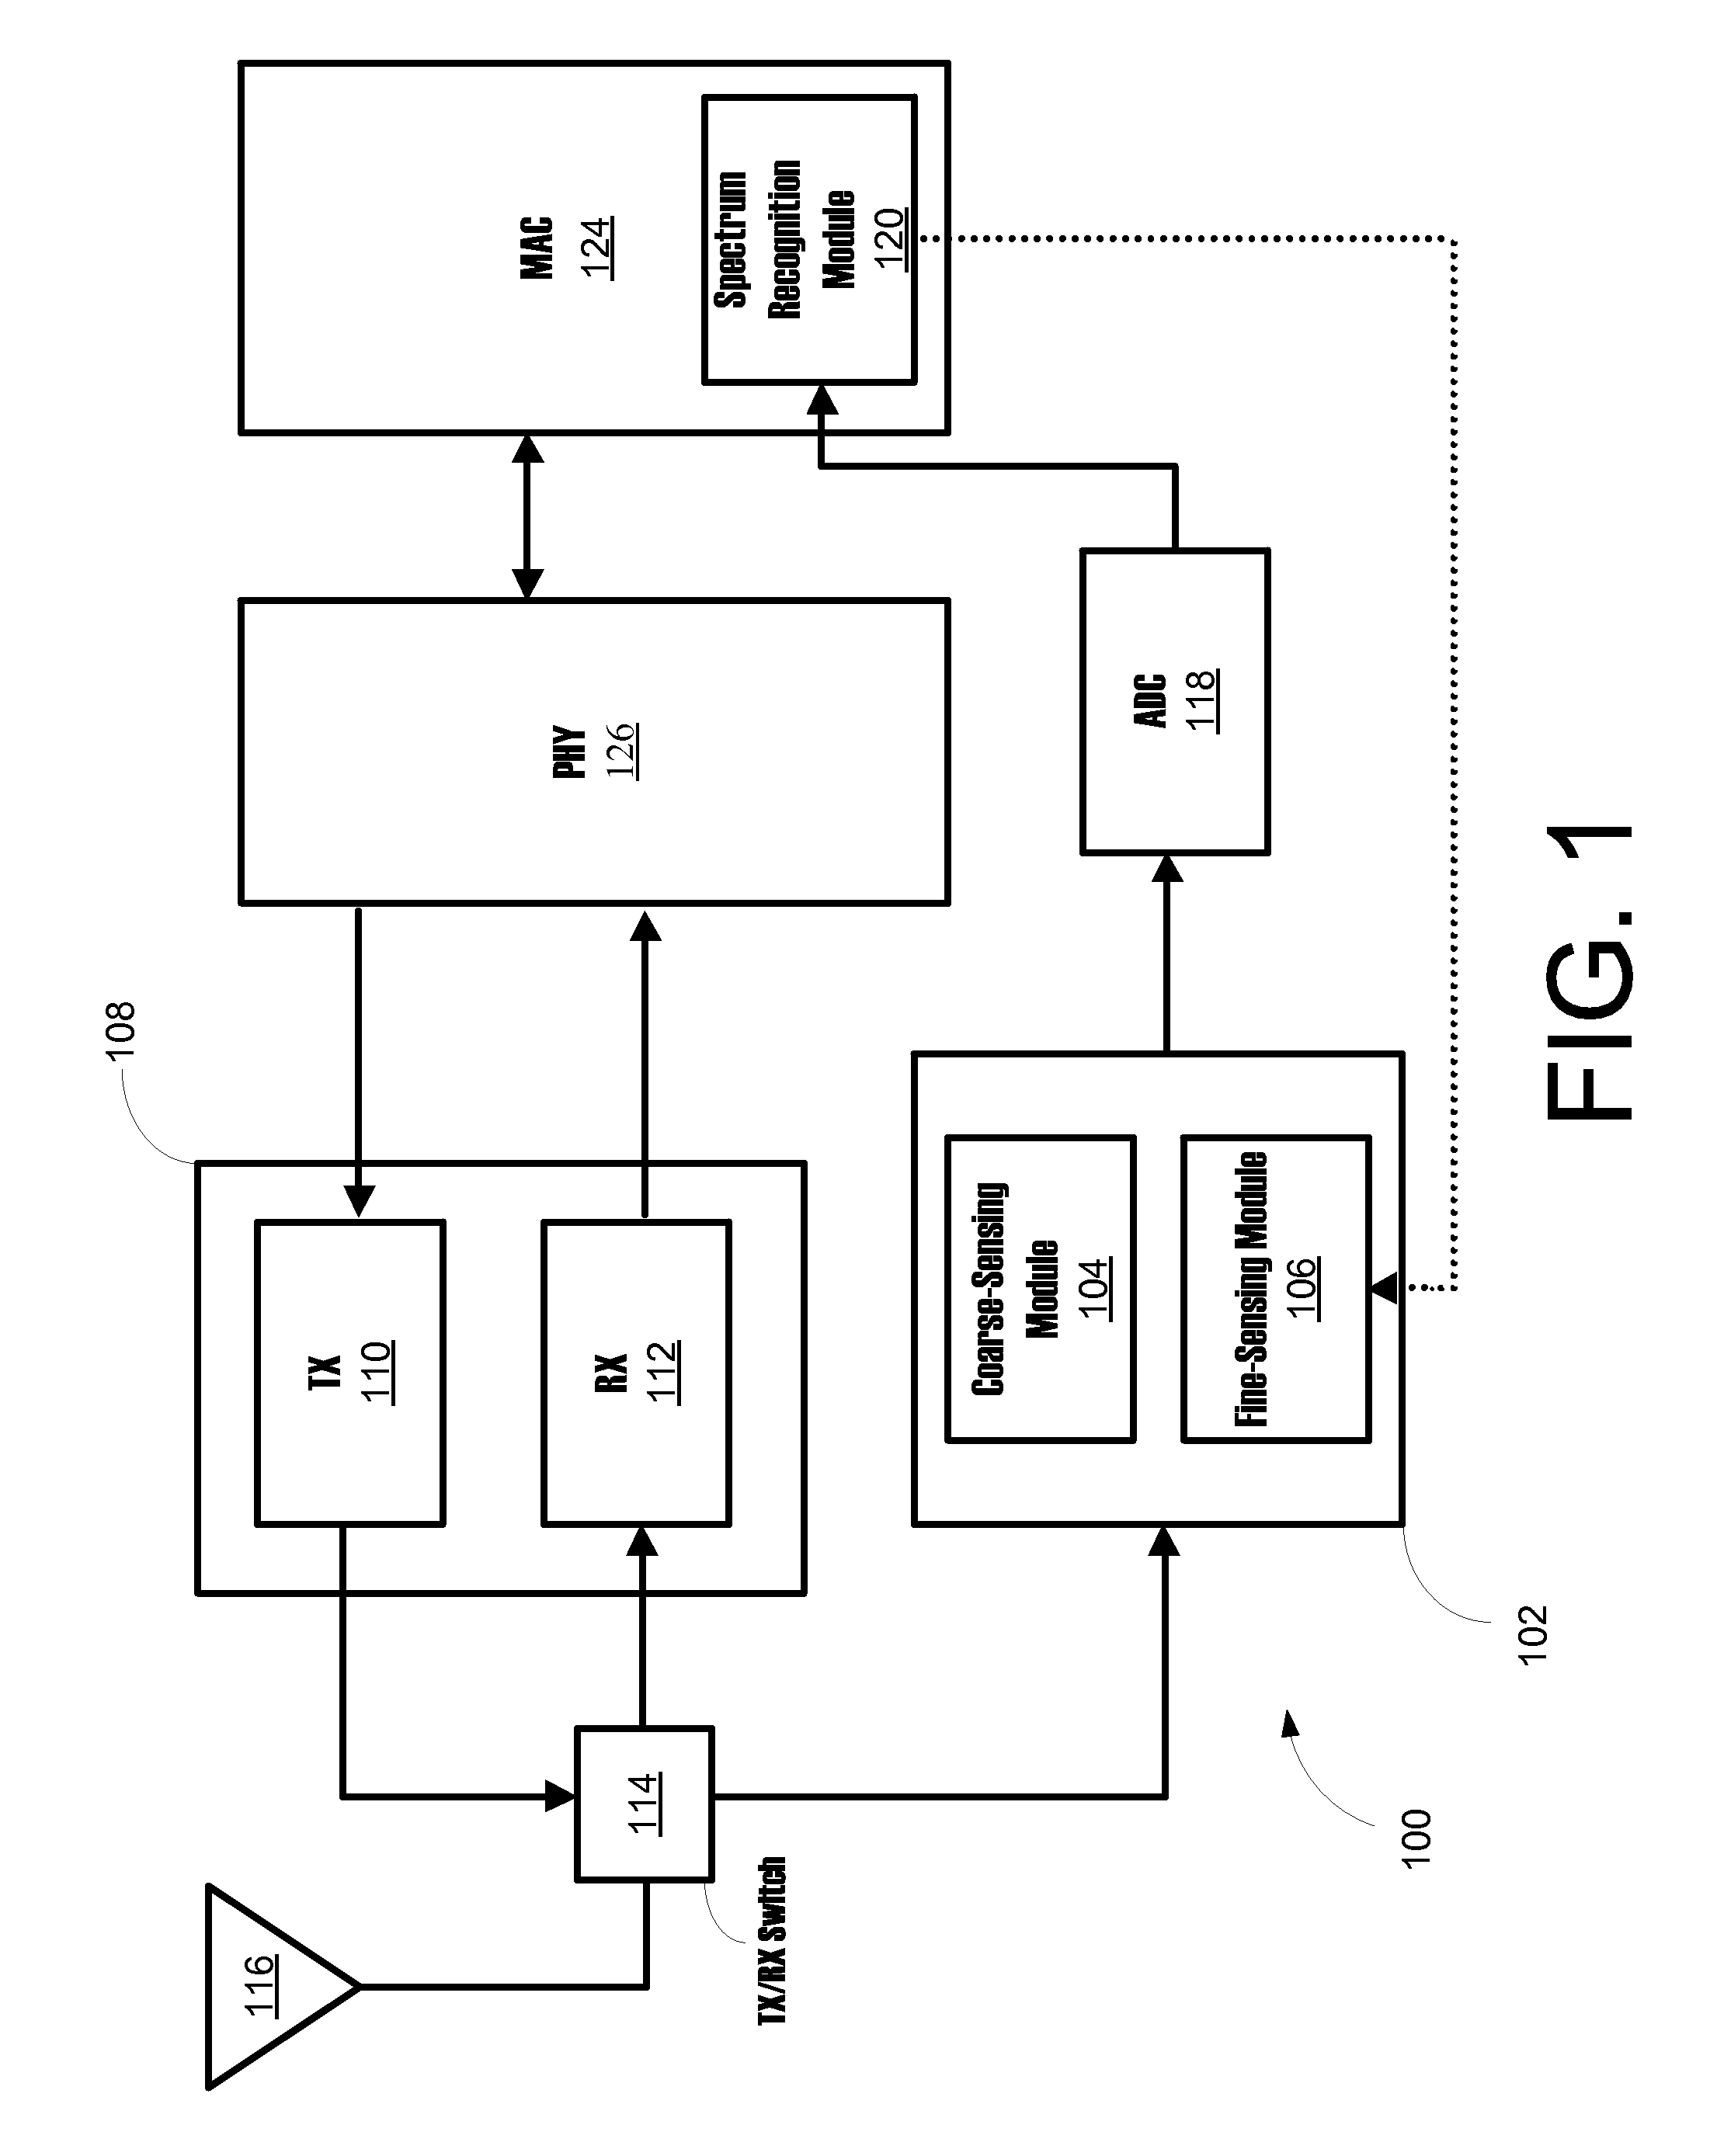 Systems, methods, and apparatuses for spectrum-sensing cognitive radios